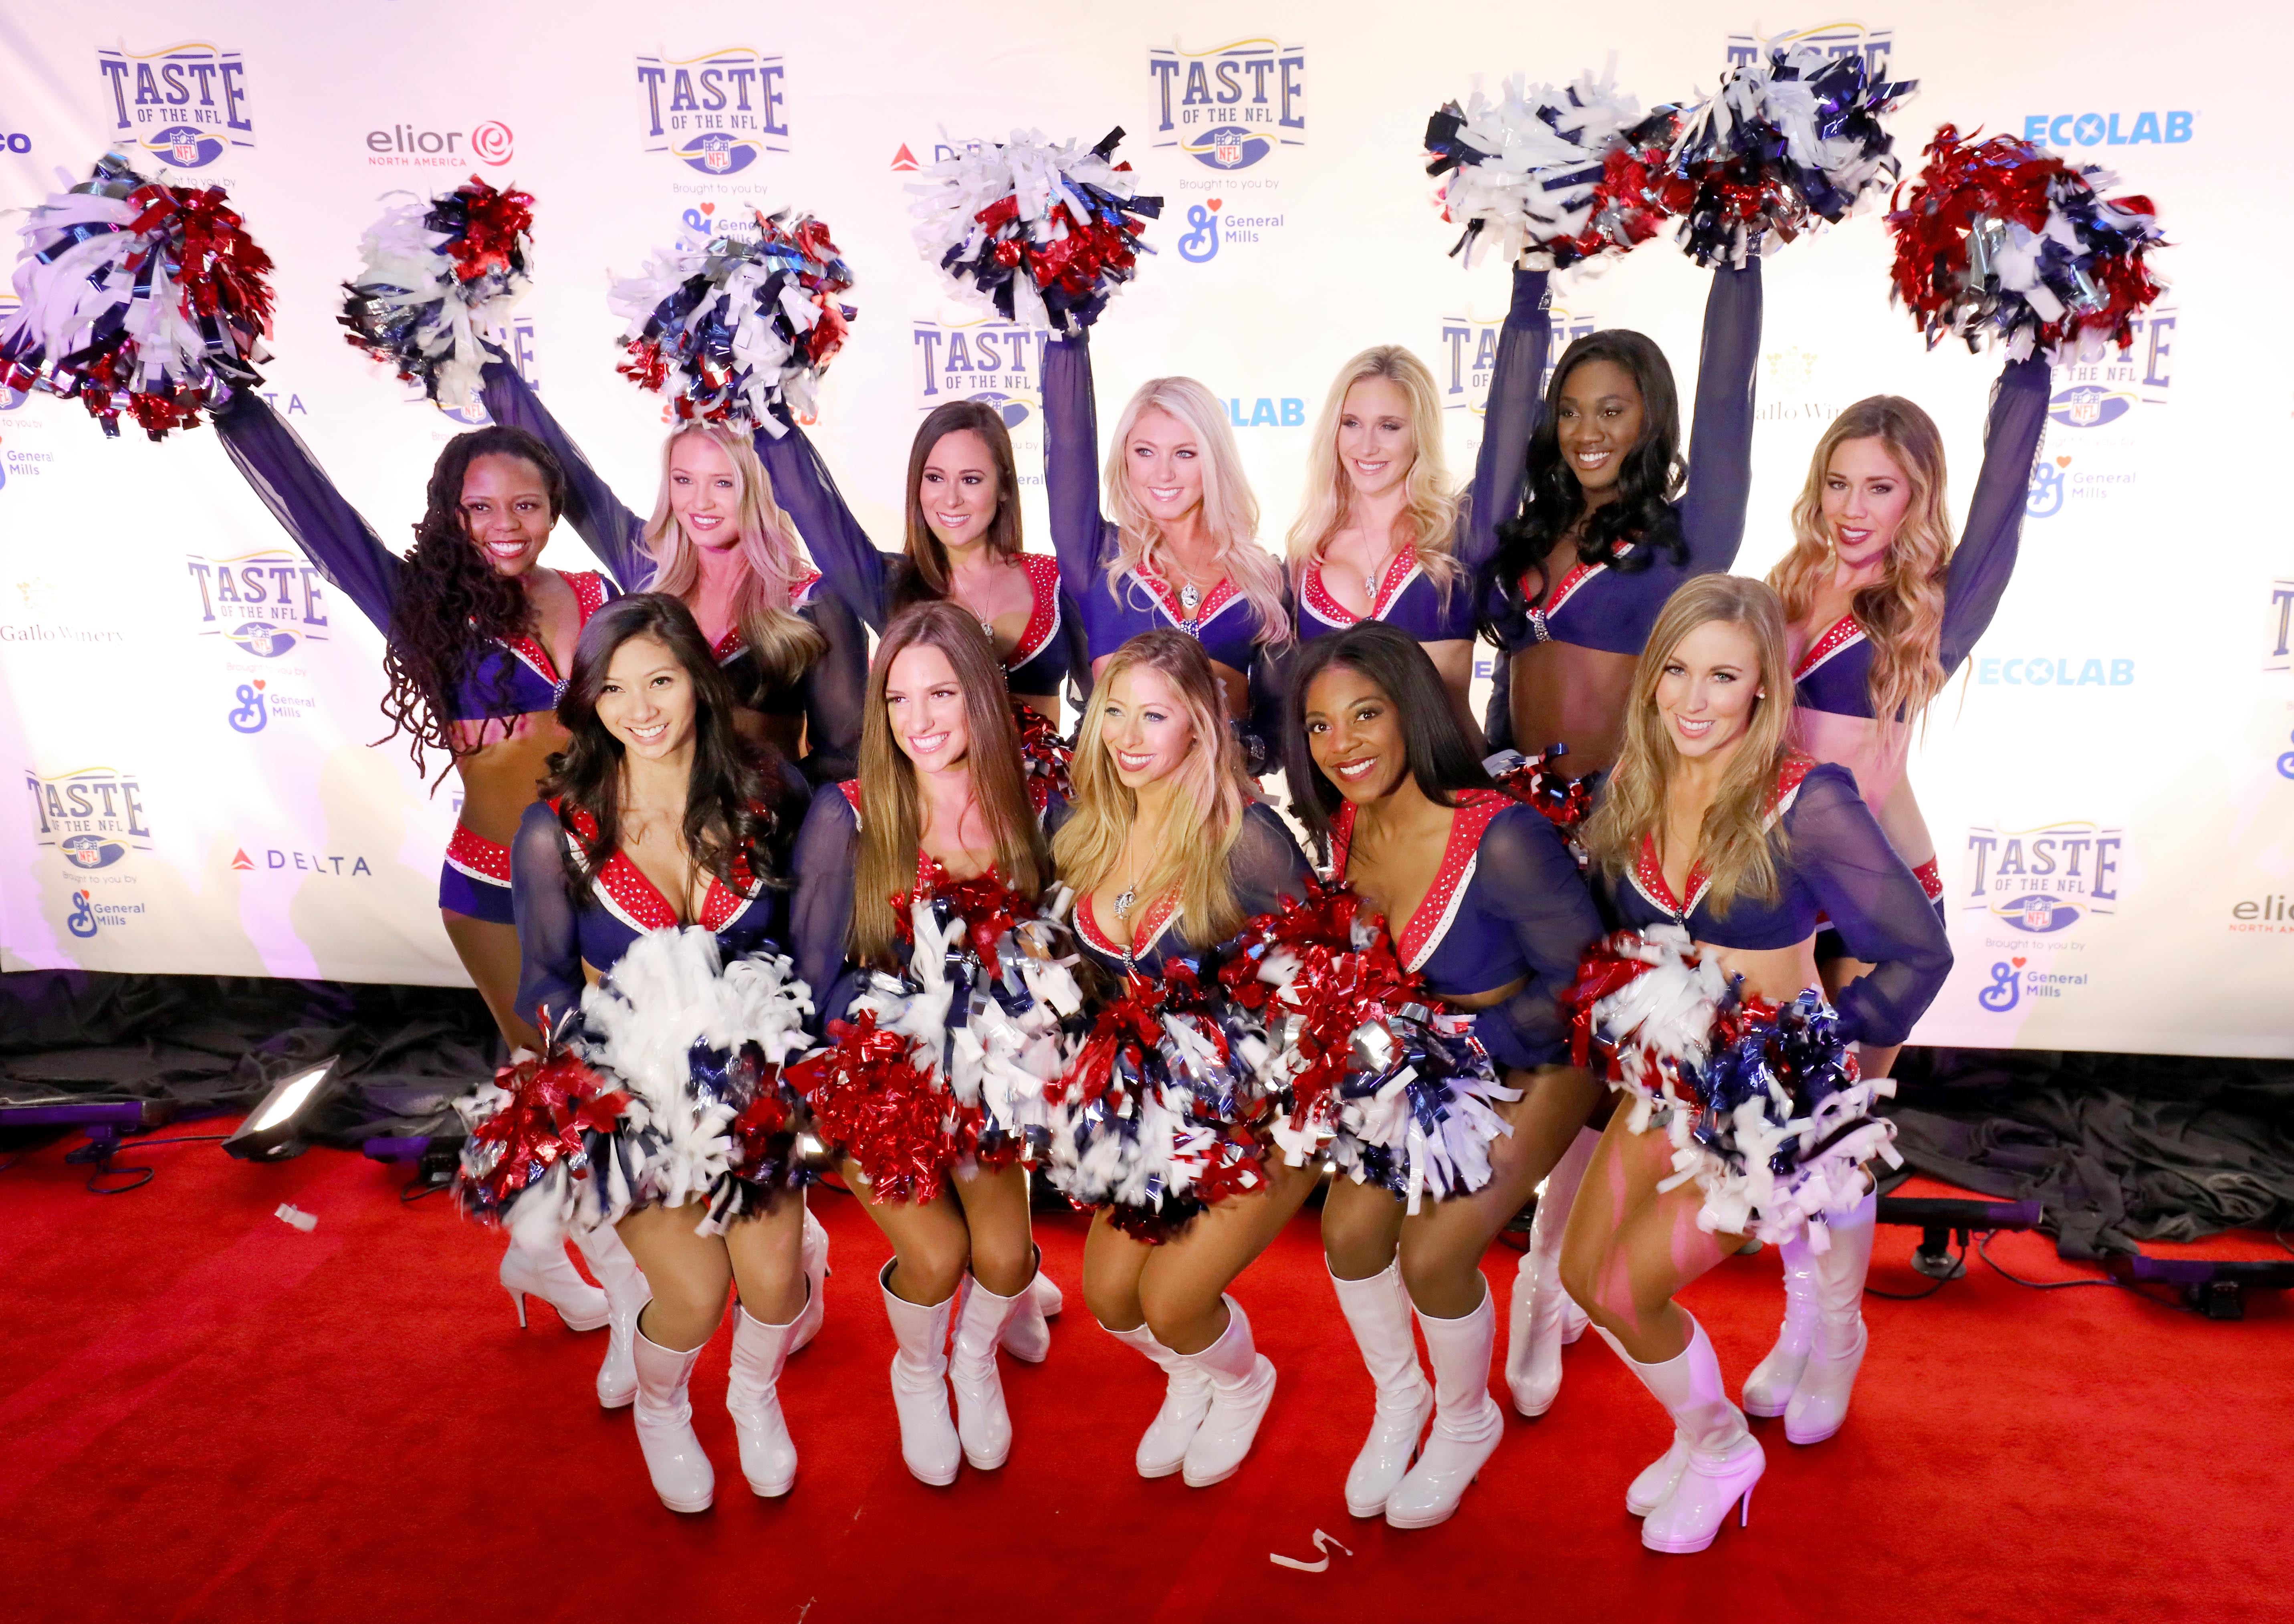 New England Patriots Cheerleaders attend The 27th Annual Party With A Purpose on February 3, 2018 in St Paul, Minnesota.  (Adam Bettcher/Getty Images for Taste Of The NFL)